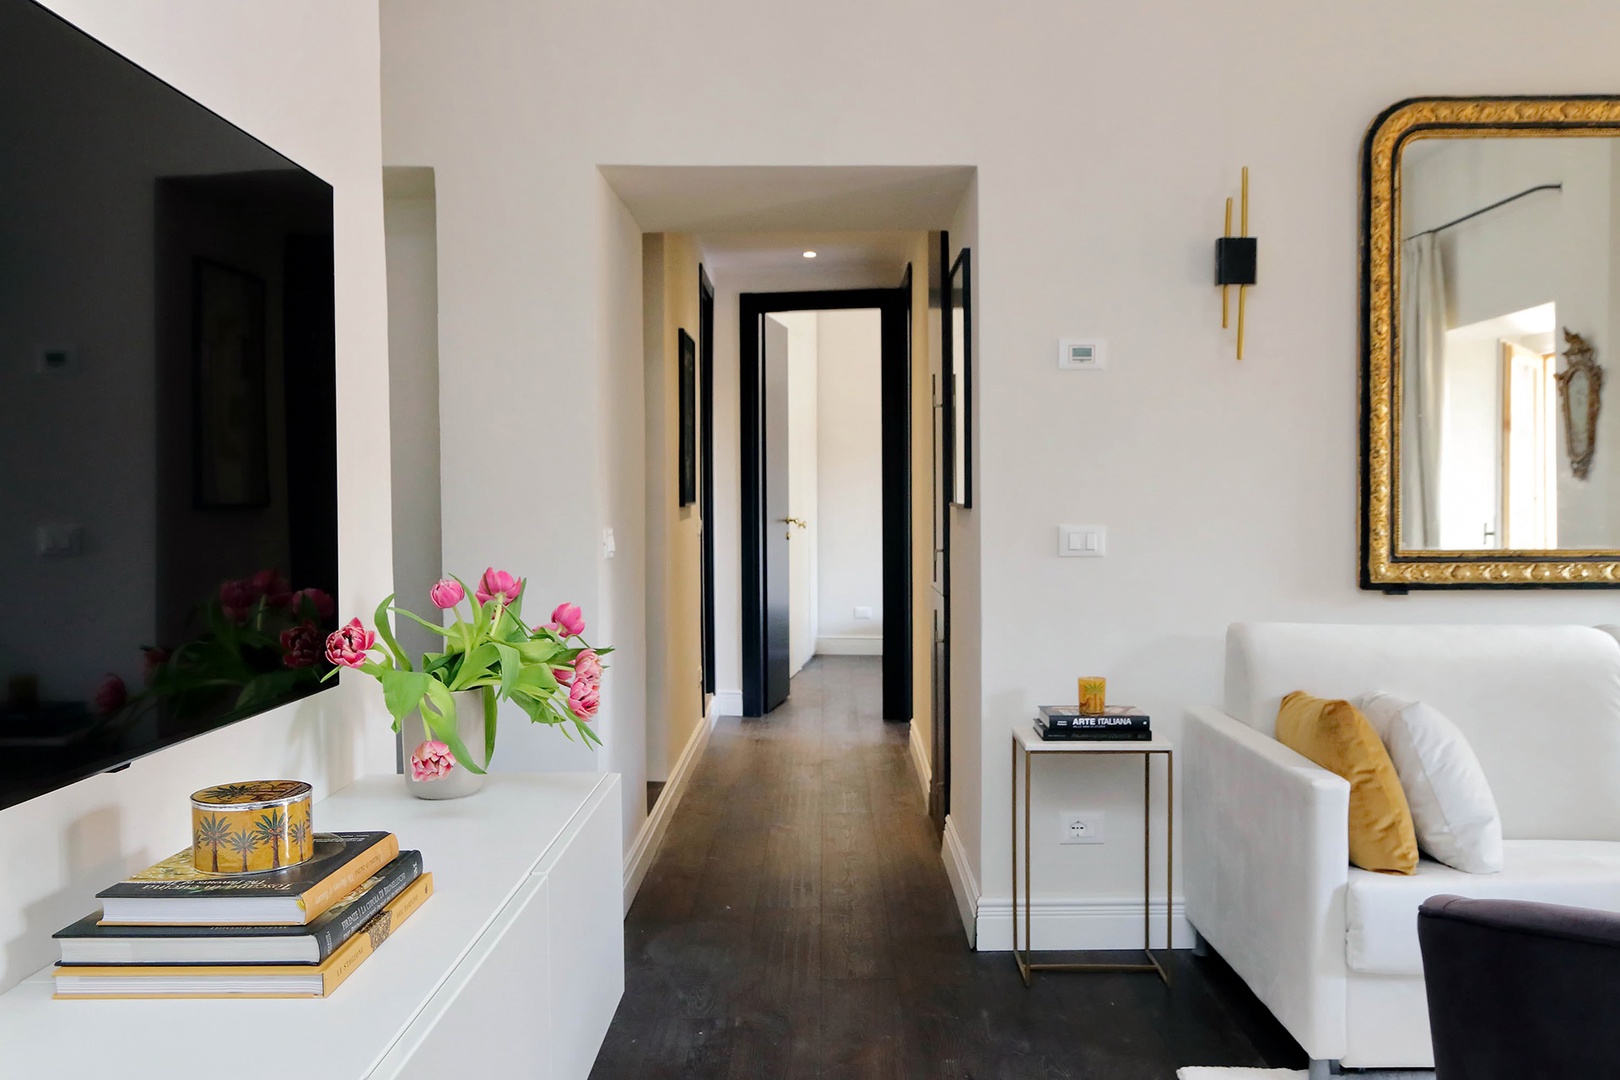 The spacious hallway leads to the bedrooms and bathrooms.